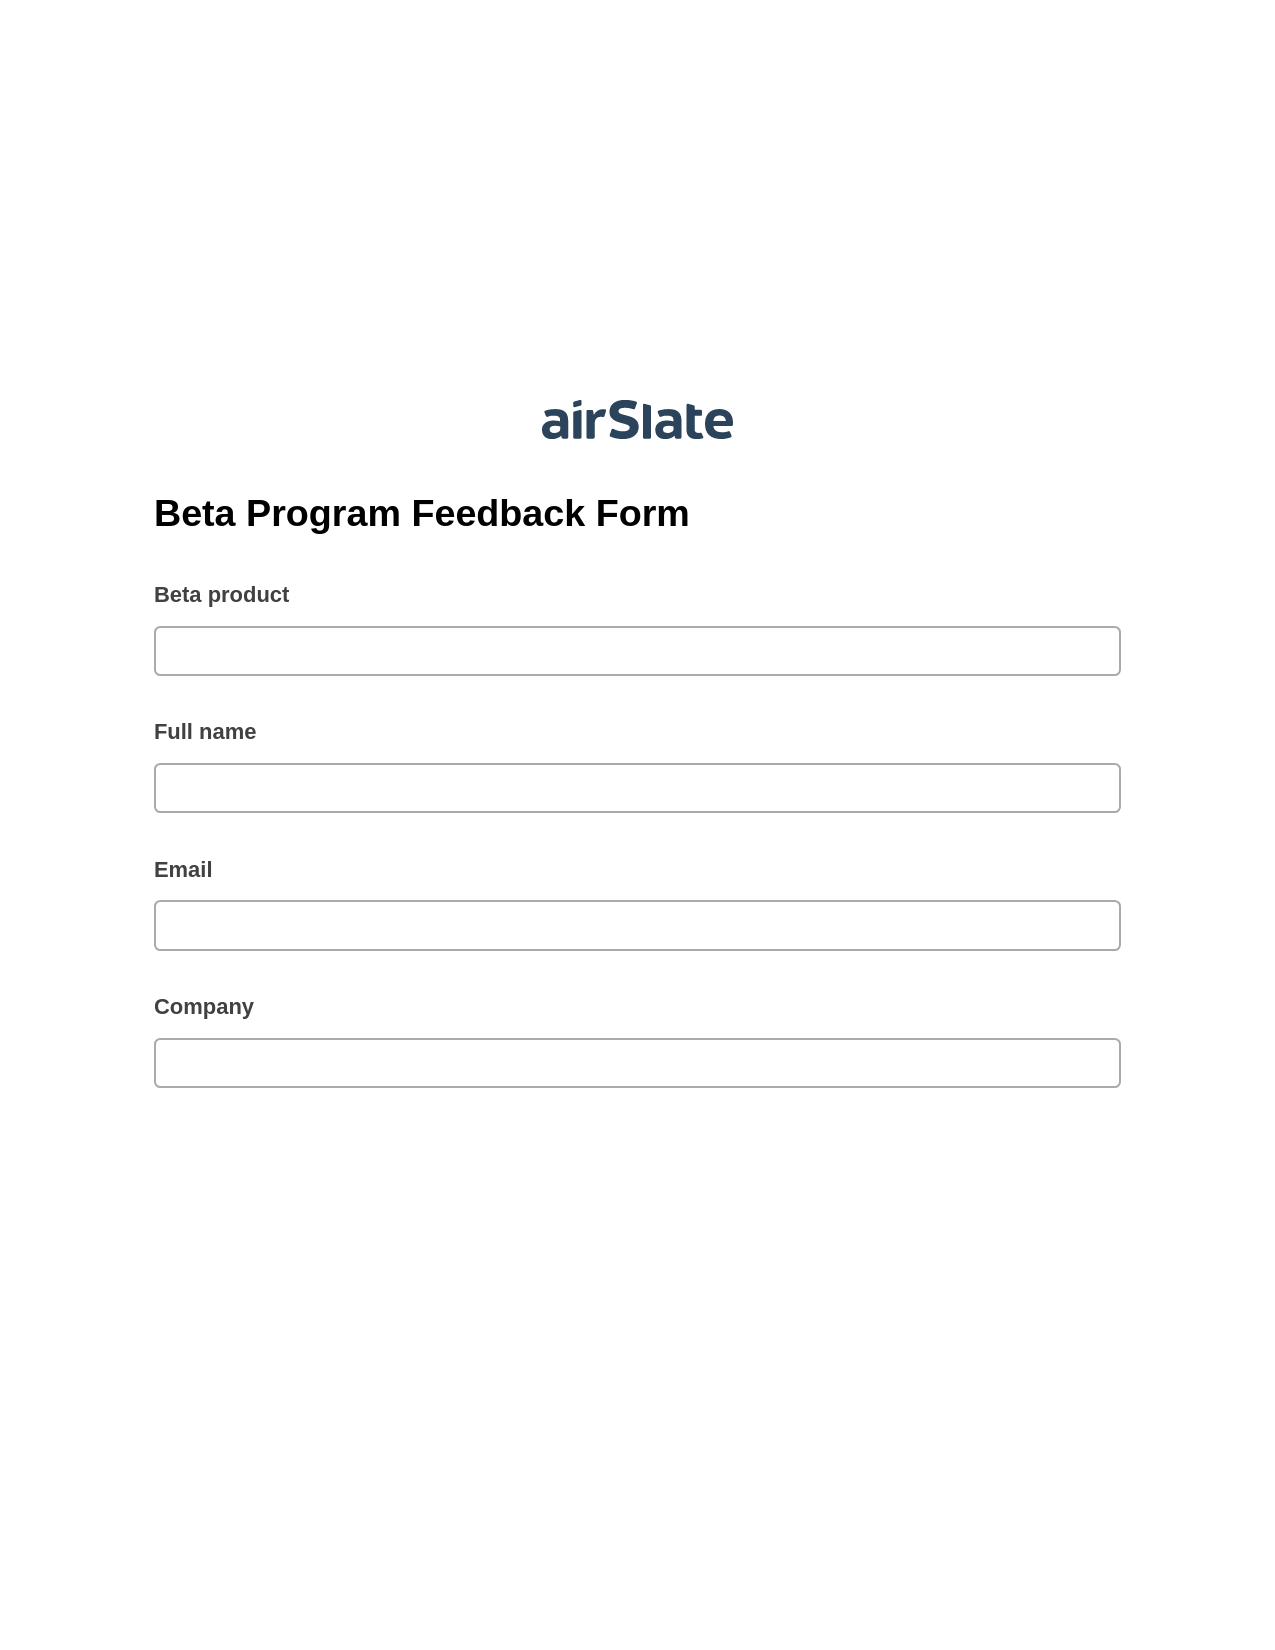 Beta Program Feedback Form Pre-fill from another Slate Bot, Webhook Bot, Export to Excel 365 Bot